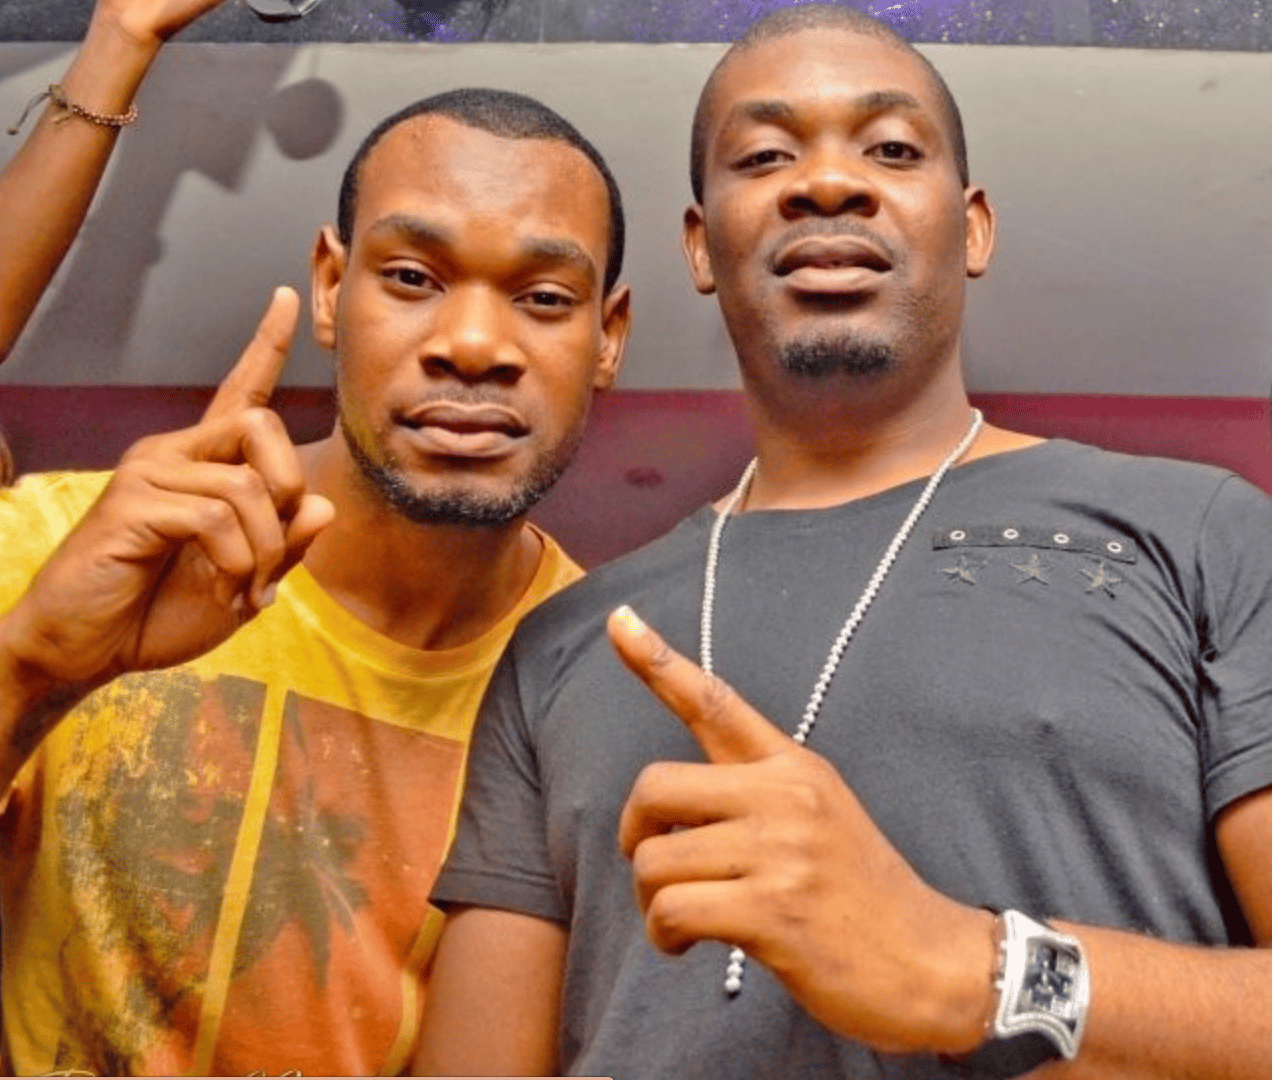 Don Jazzy and DPrince